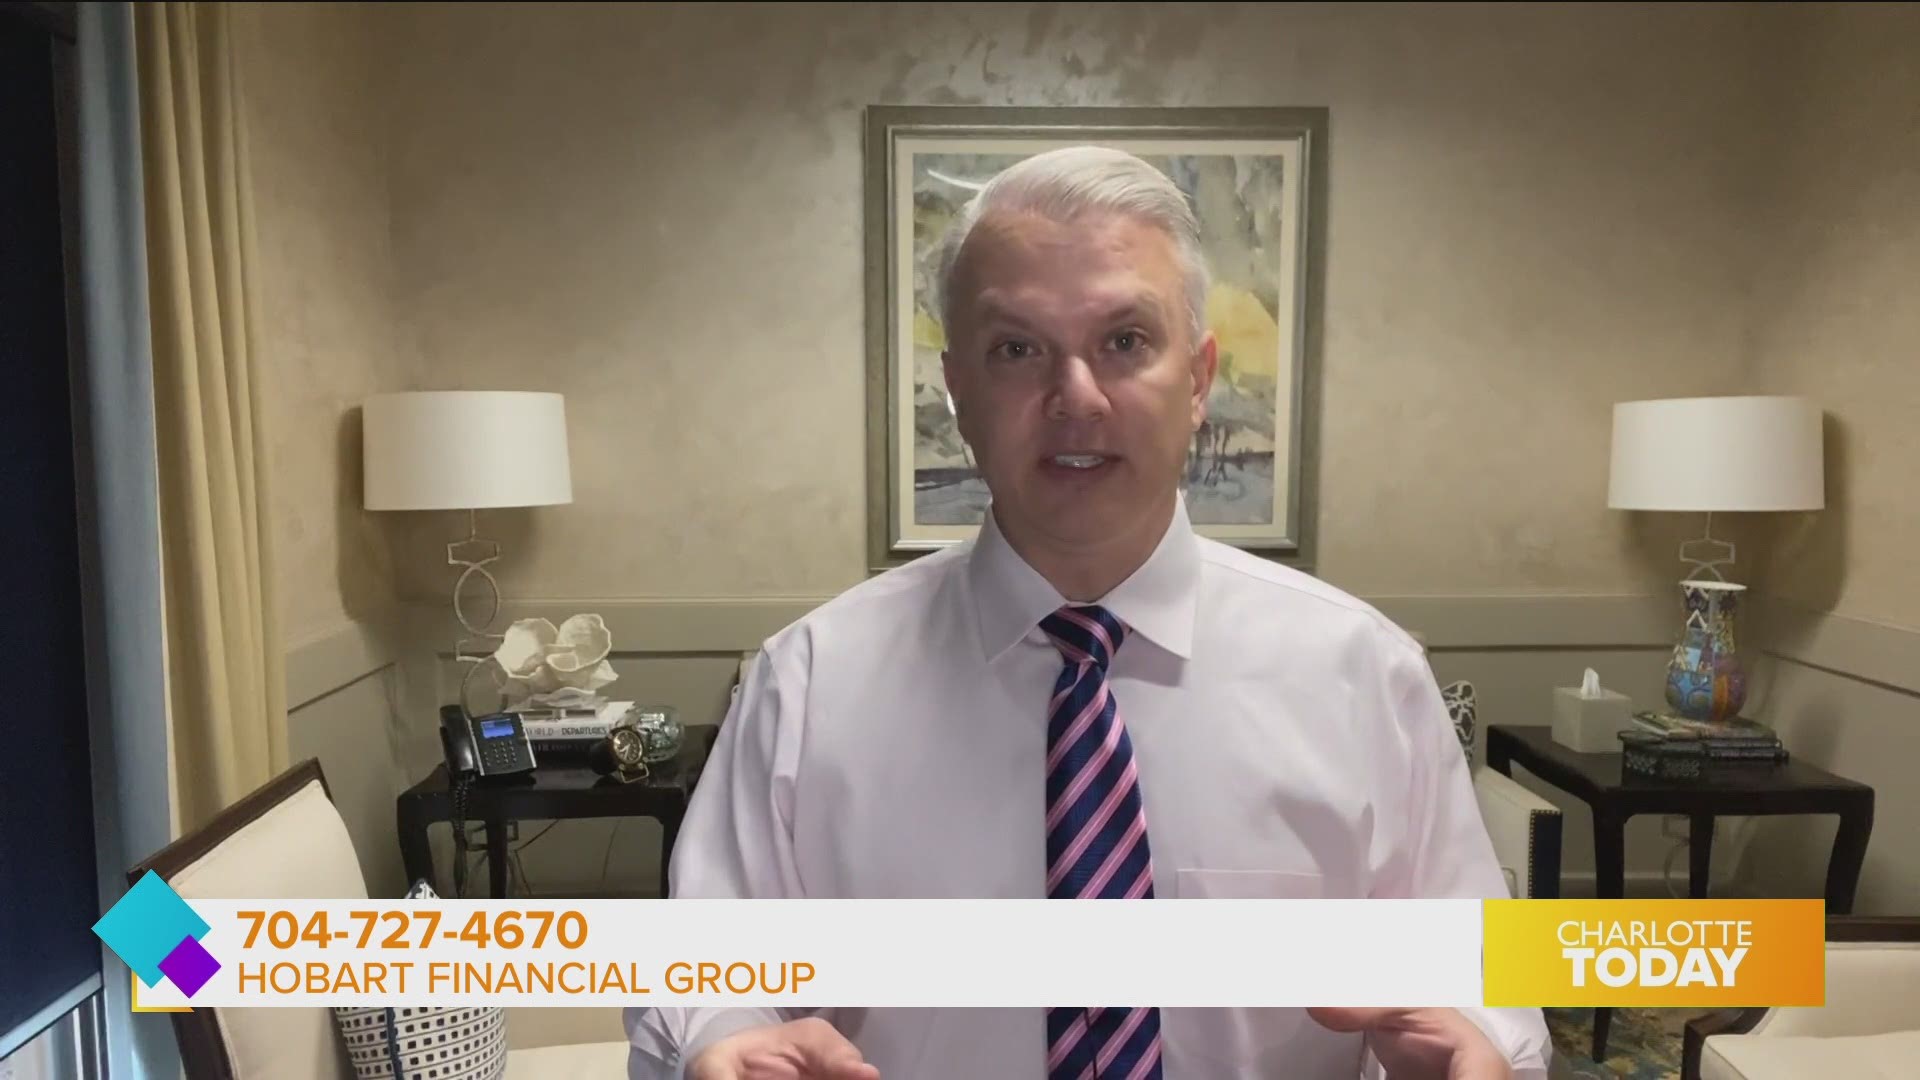 Hobart Financial Group explains why women have different financial concerns than men